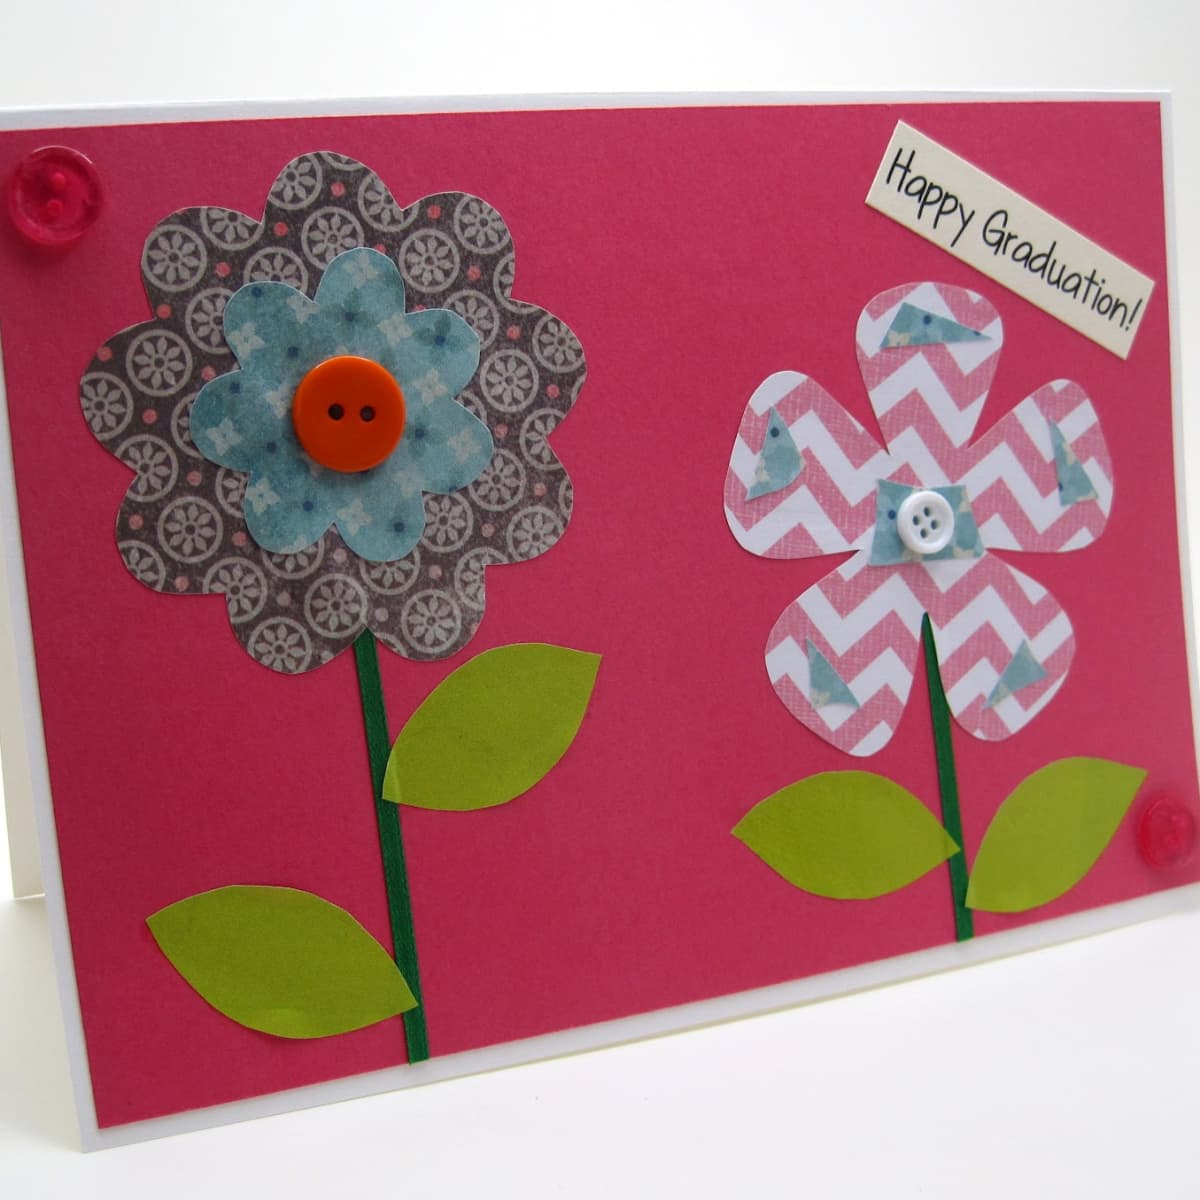 Last-Minute DIY Mother's Day Gift Ideas - Rose Clearfield